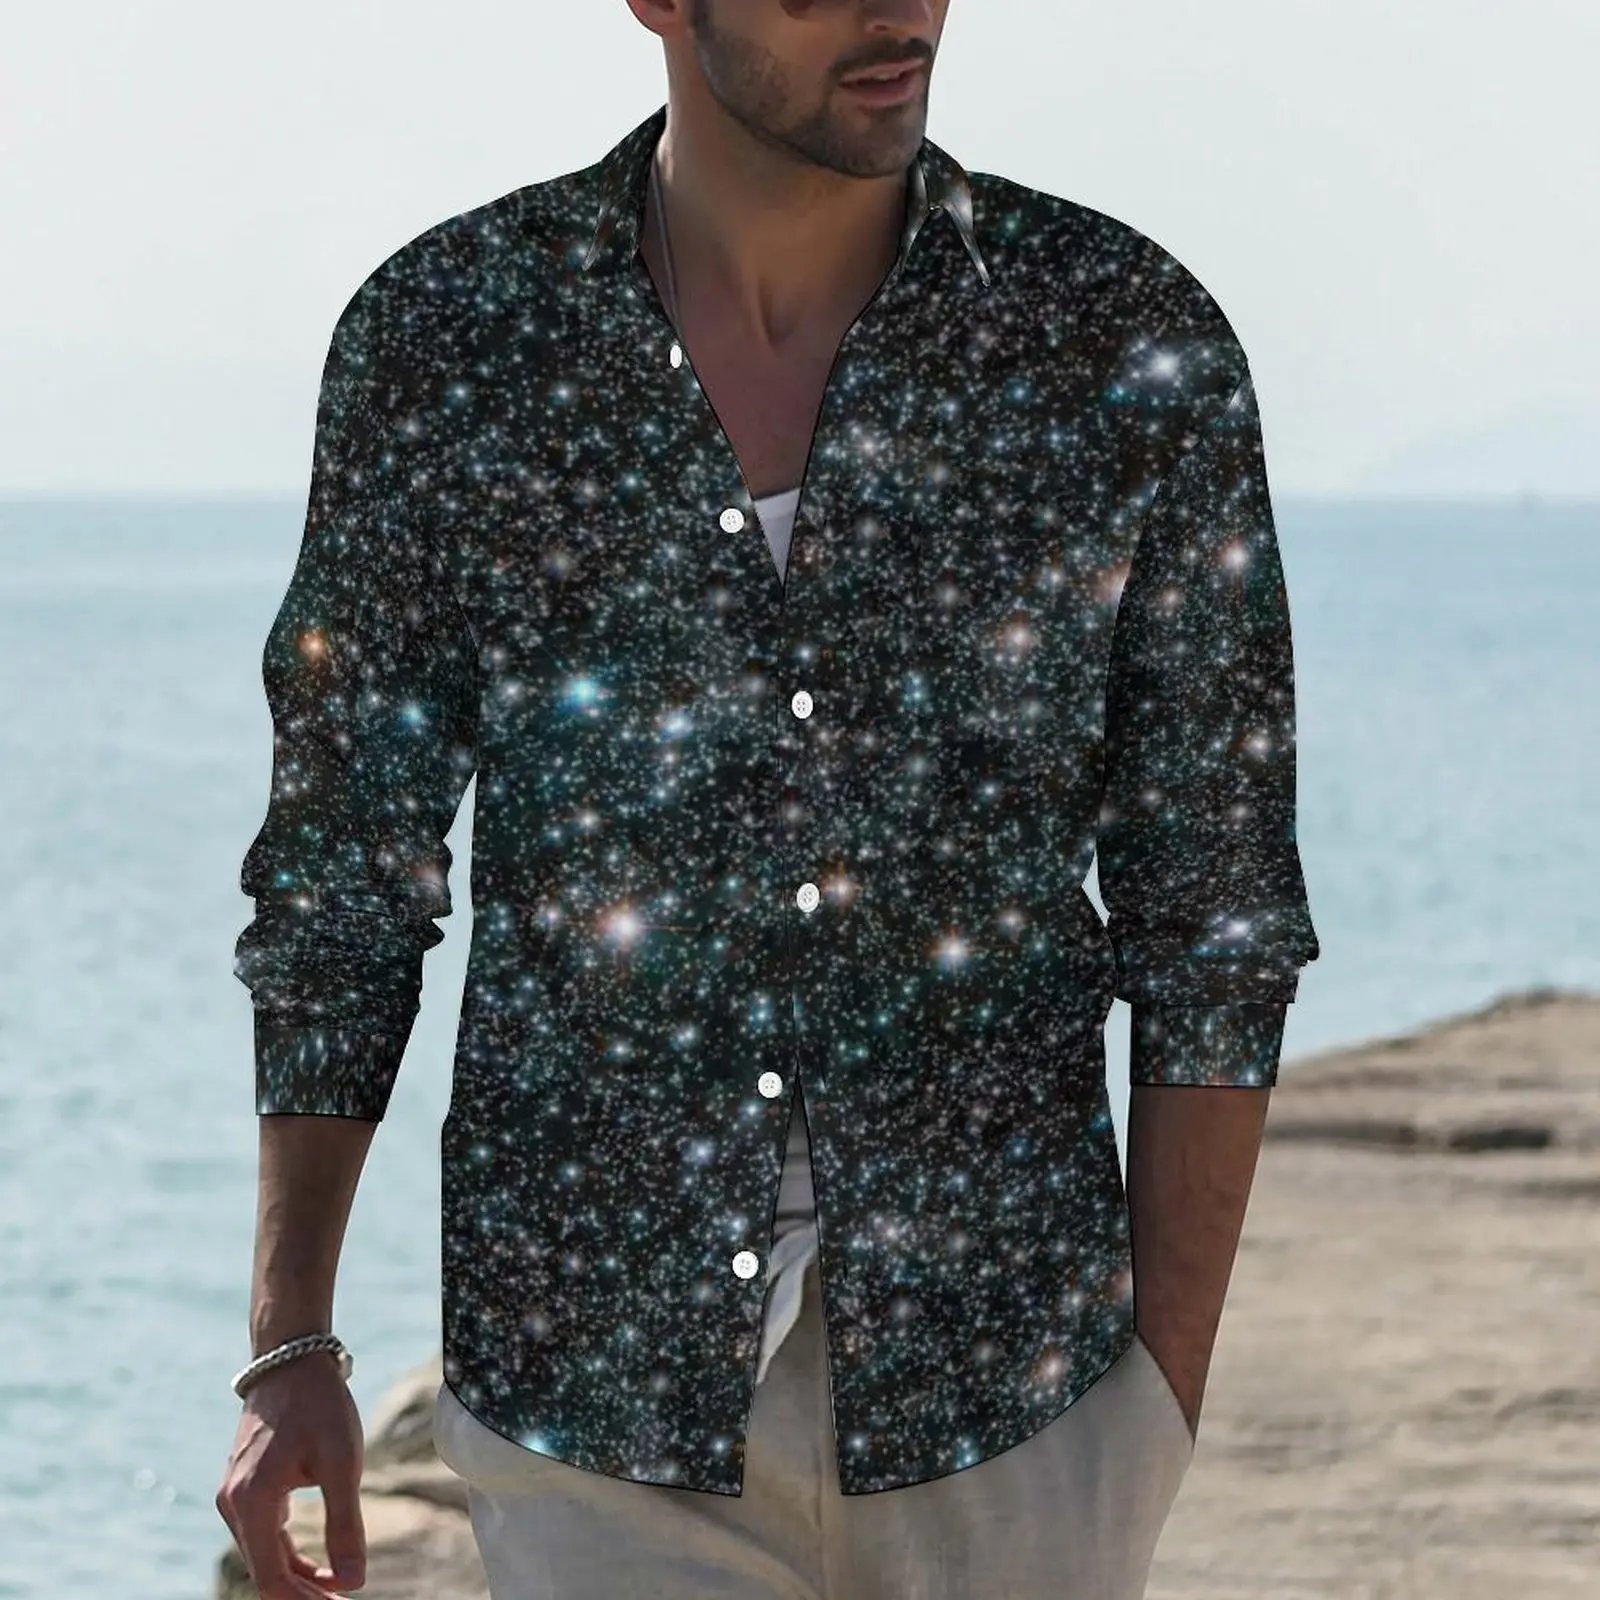 

Galaxy Stars Shirt Stars Cosmic Outer Space Universe Black Casual Shirts Man Vintage Blouses Long Sleeve Aesthetic Top Plus Size